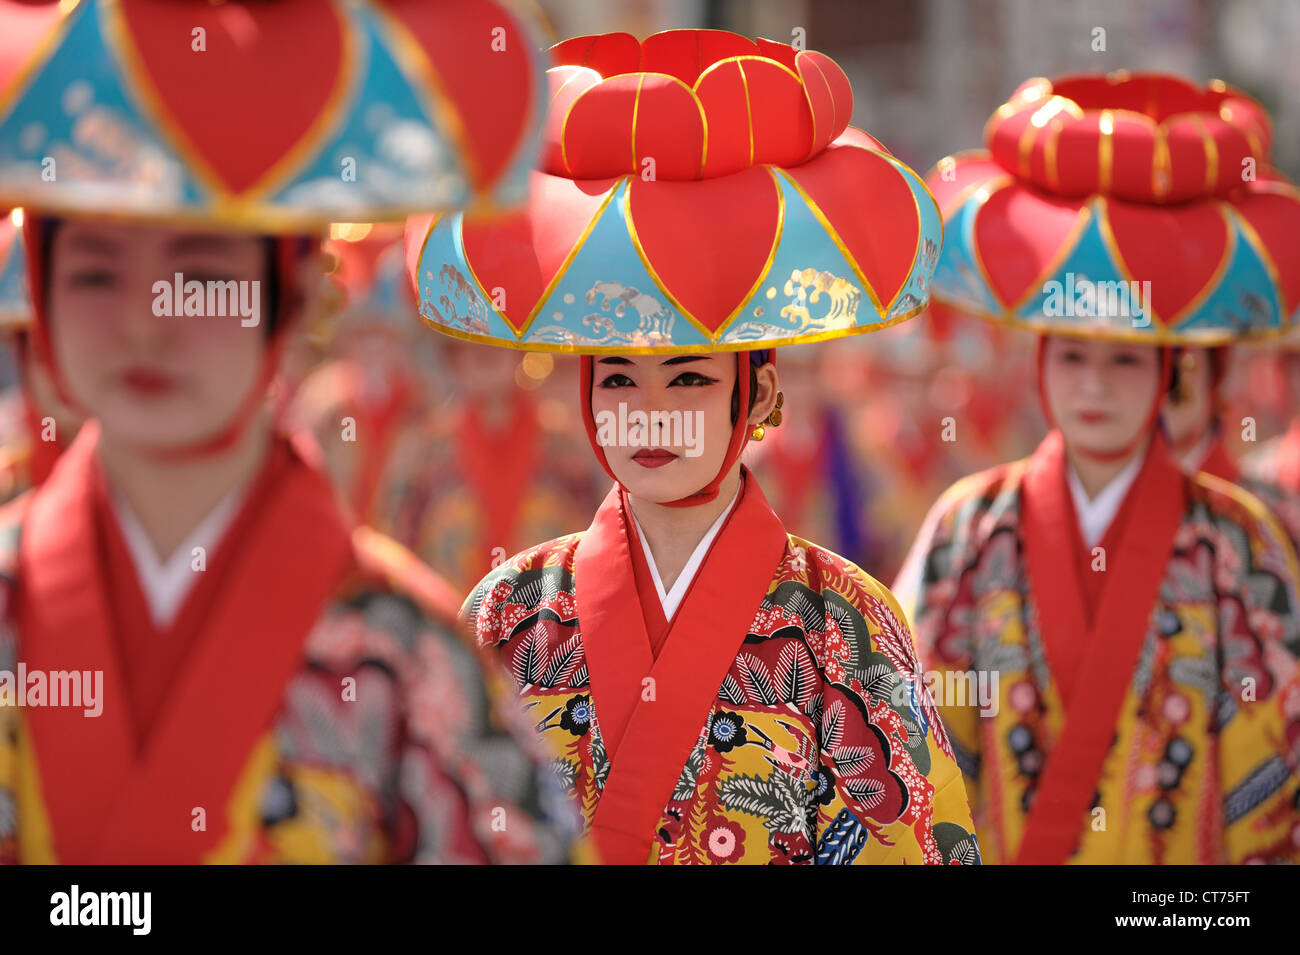 Traditional dance performers make their way to the next location during a local festival in Okinawa, Japan. Stock Photo